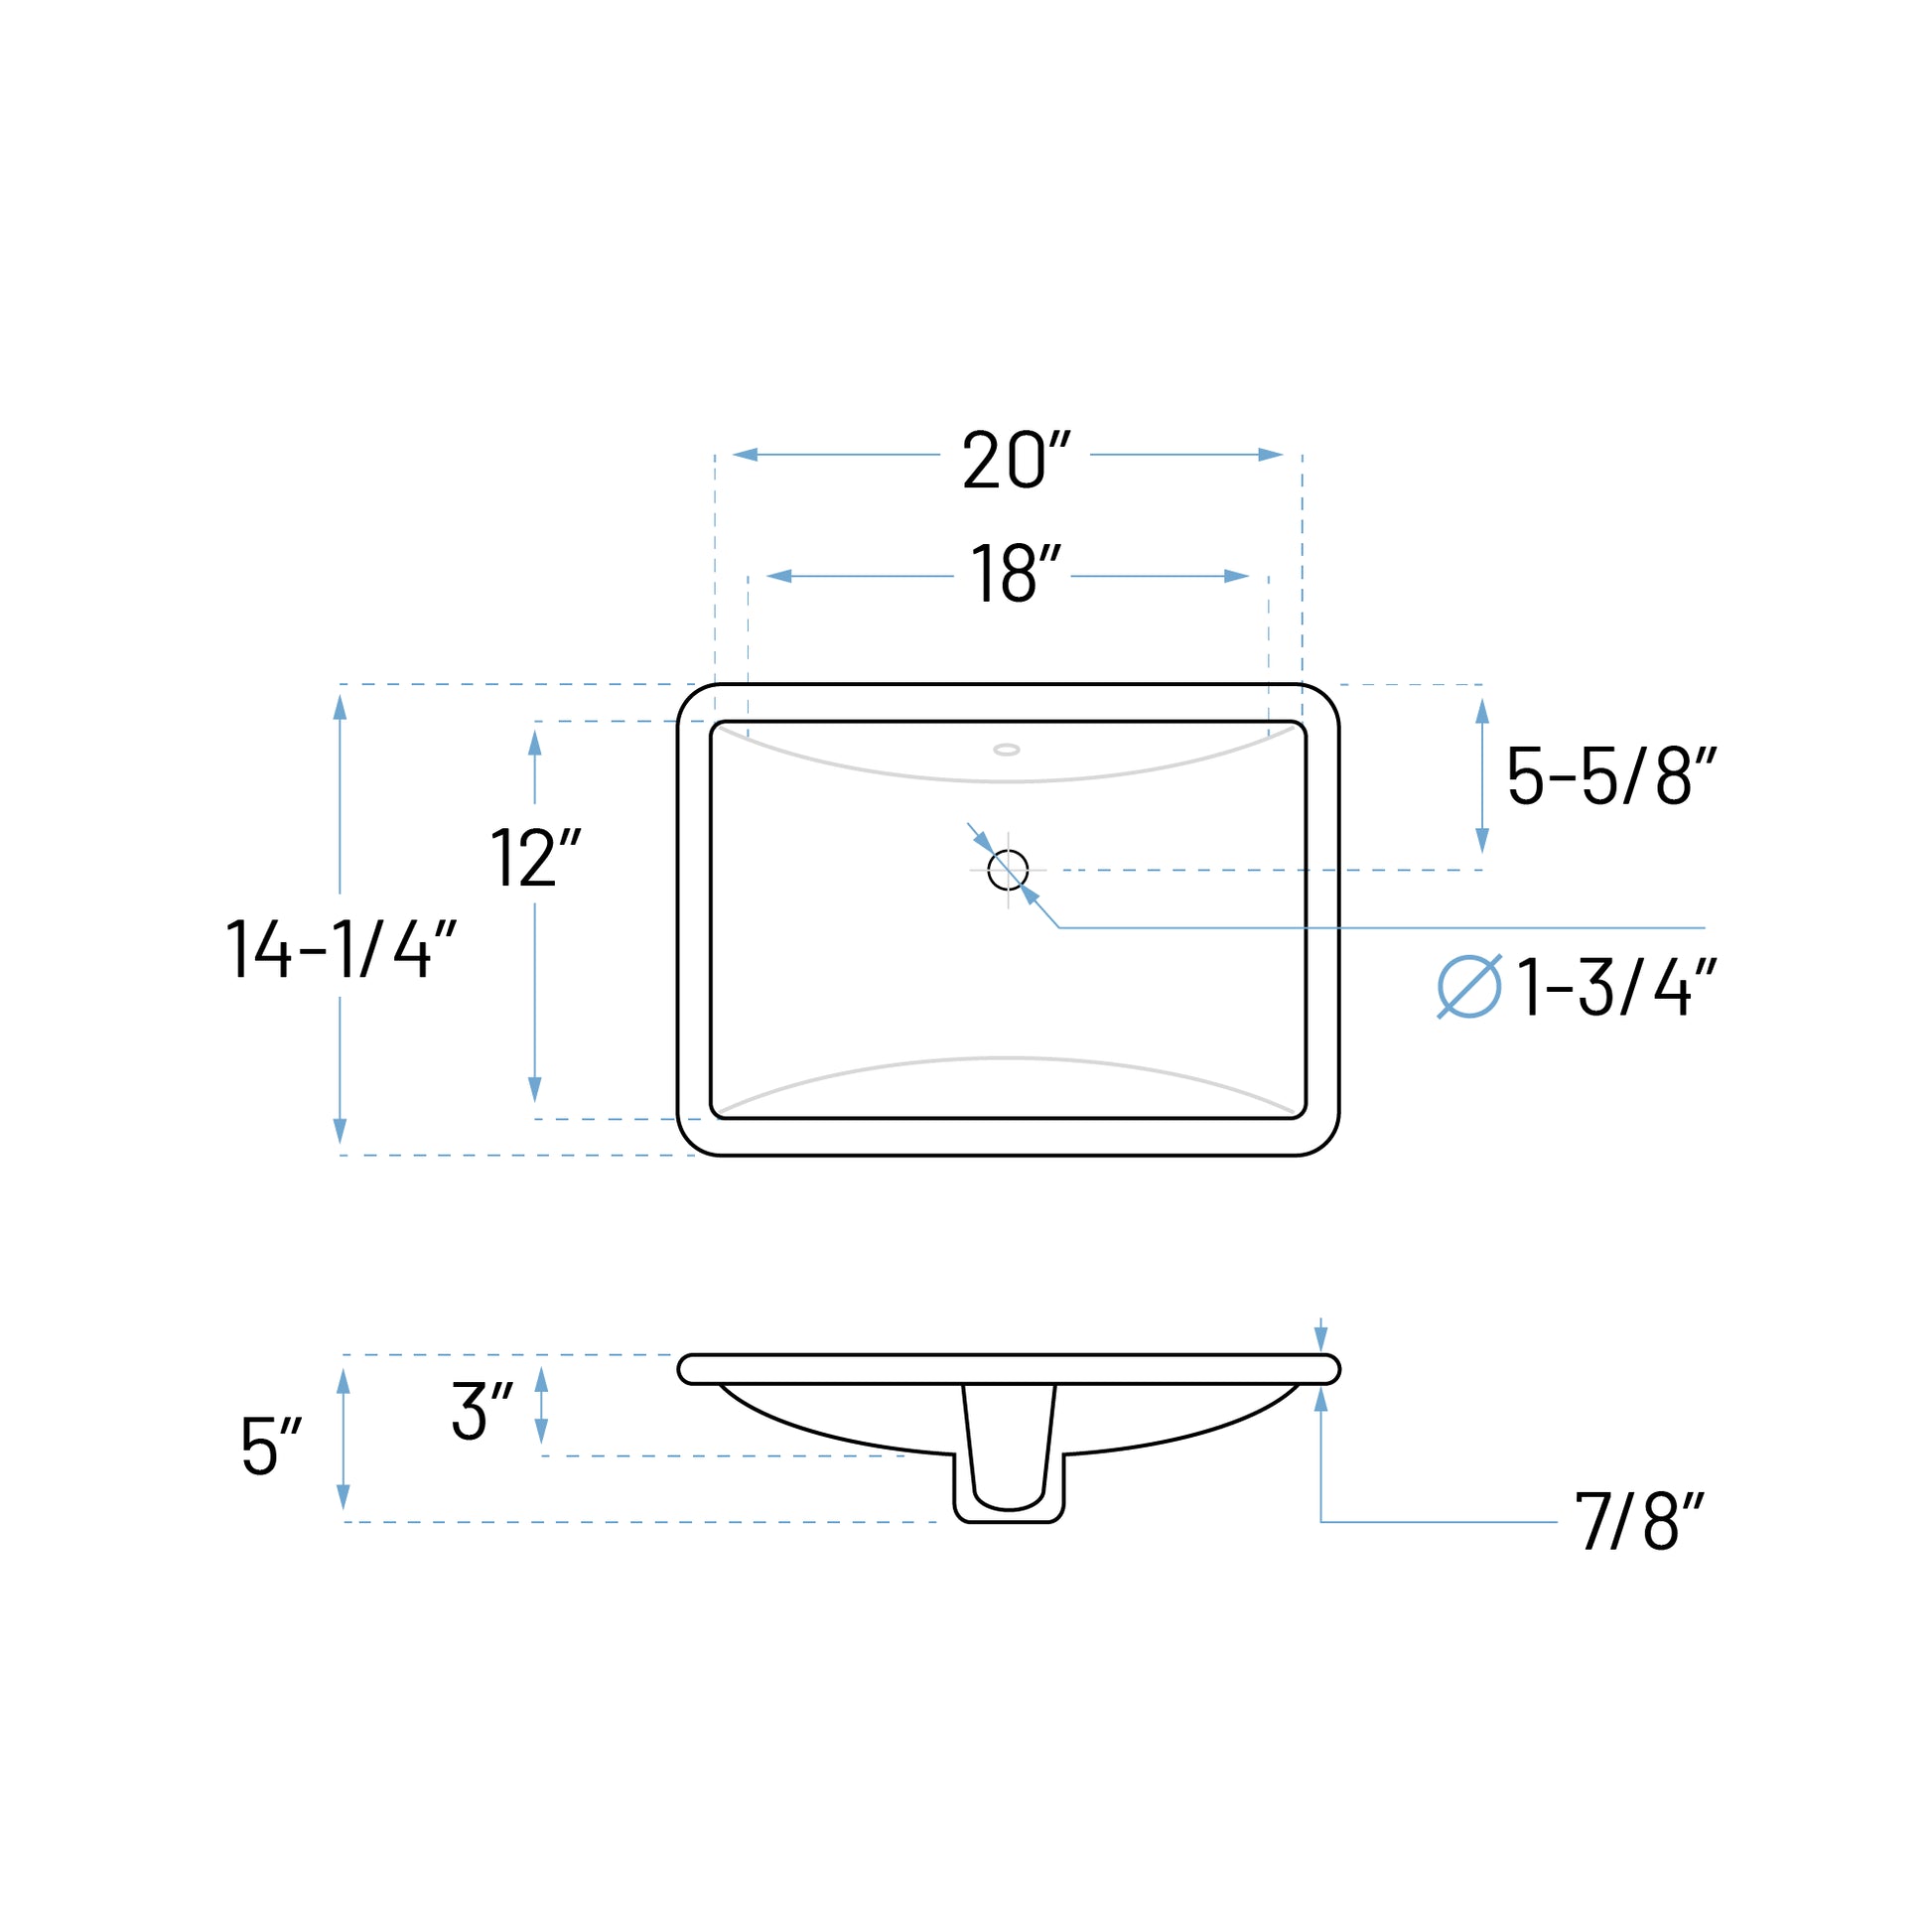 Technical Drawing of a bathroom Sink